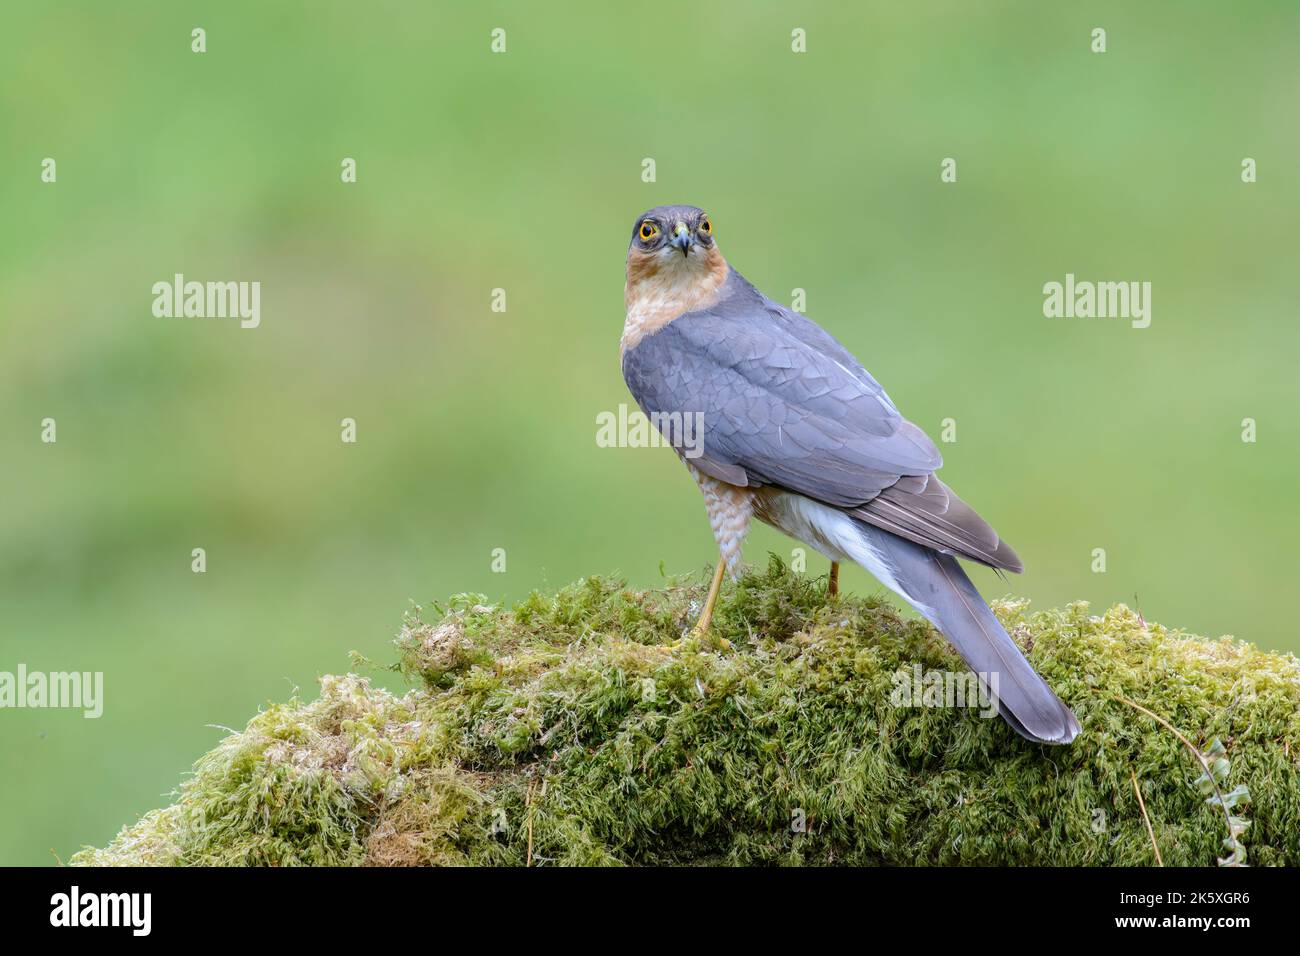 Sparrow hawk, Accipiter Nisus, Perched on a lichen covered log, side on view, head towards viewer Stock Photo